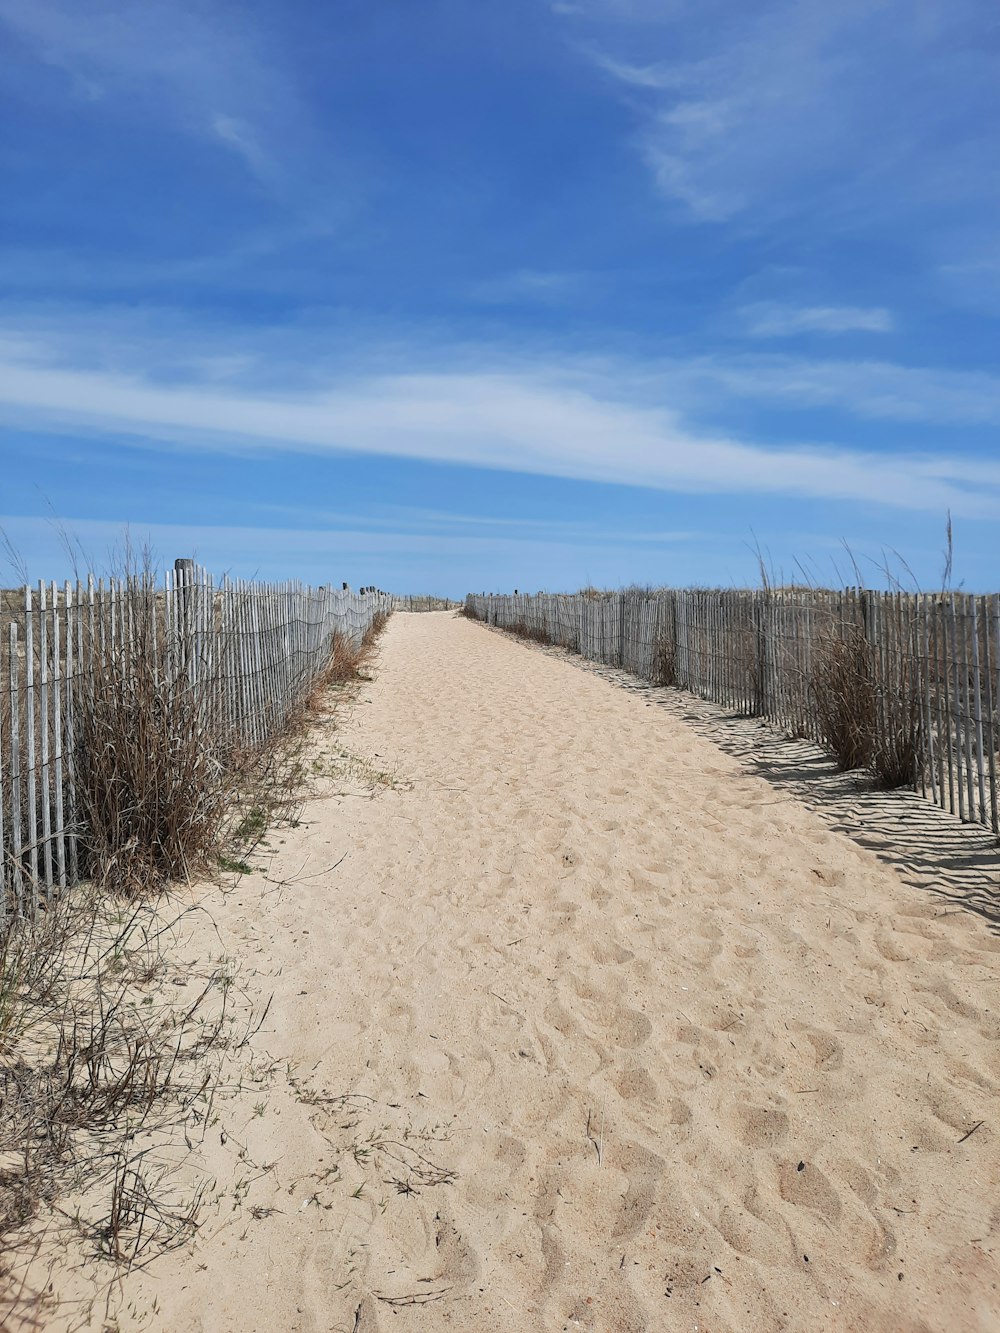 a sandy beach with a fence and bushes